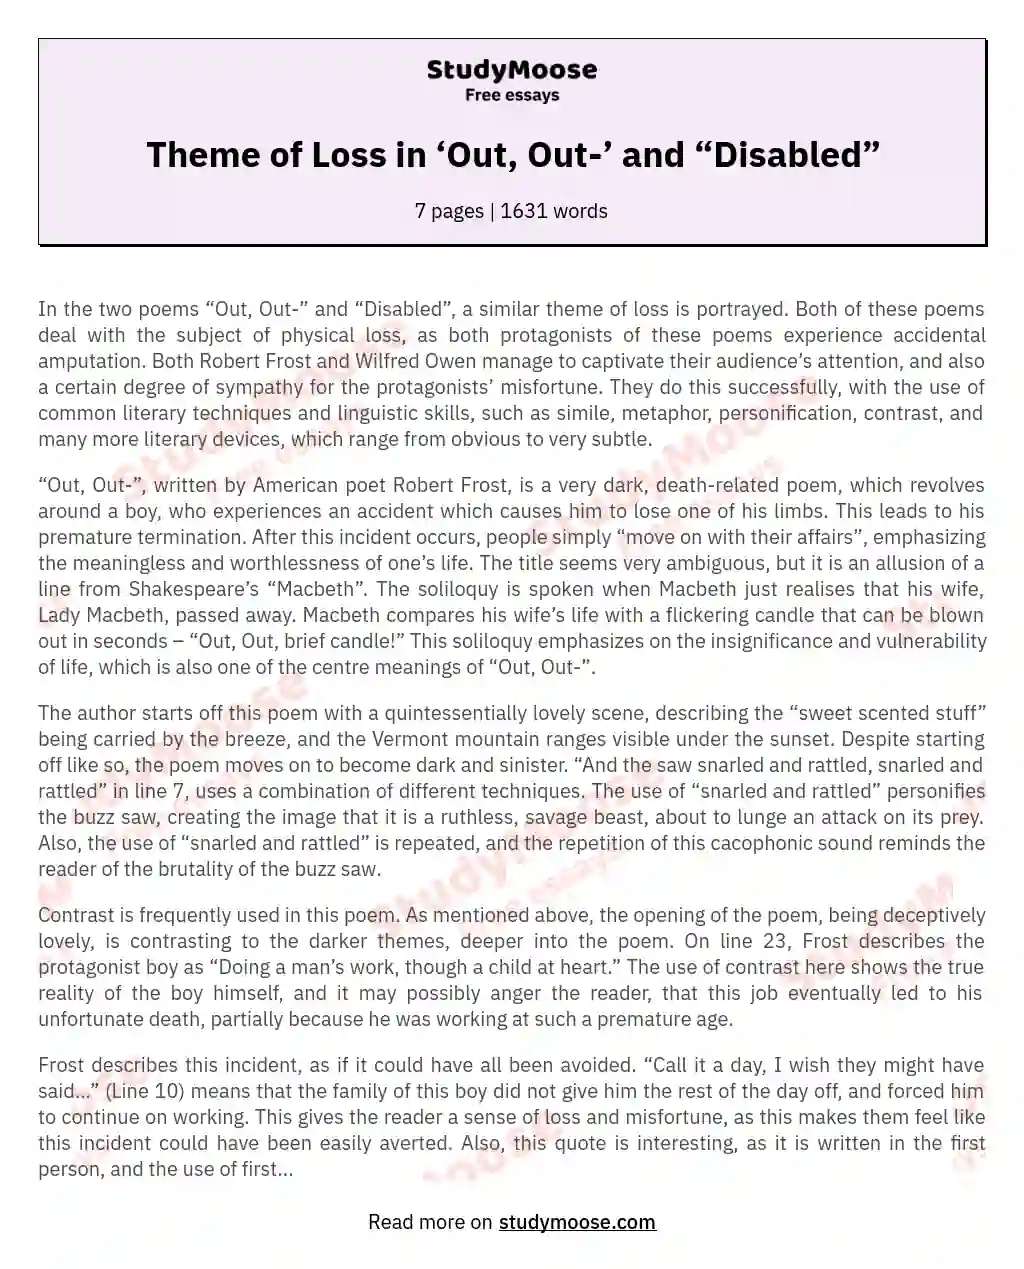 Theme of Loss in ‘Out, Out-’ and “Disabled” essay